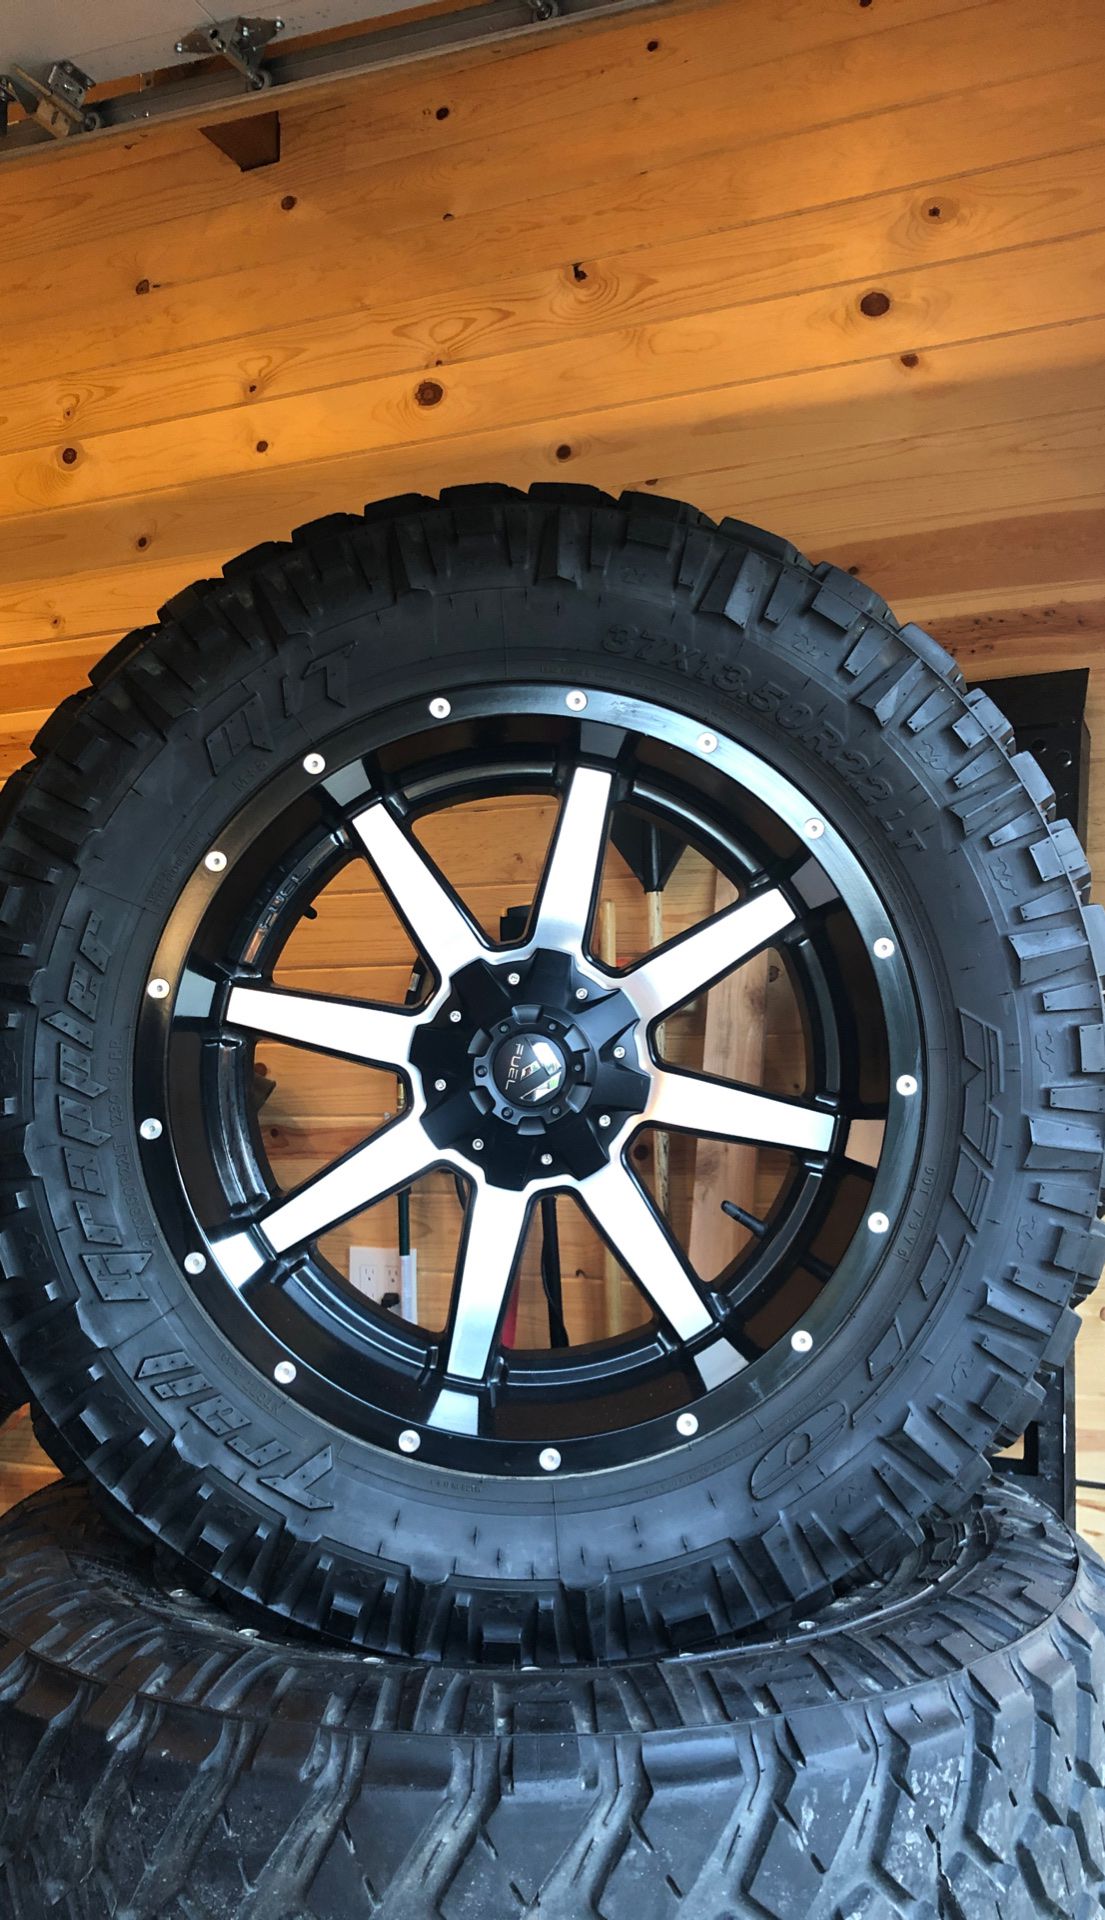 Set of Five tires and wheels for Jeep Wrangler or any 5 bolt pattern